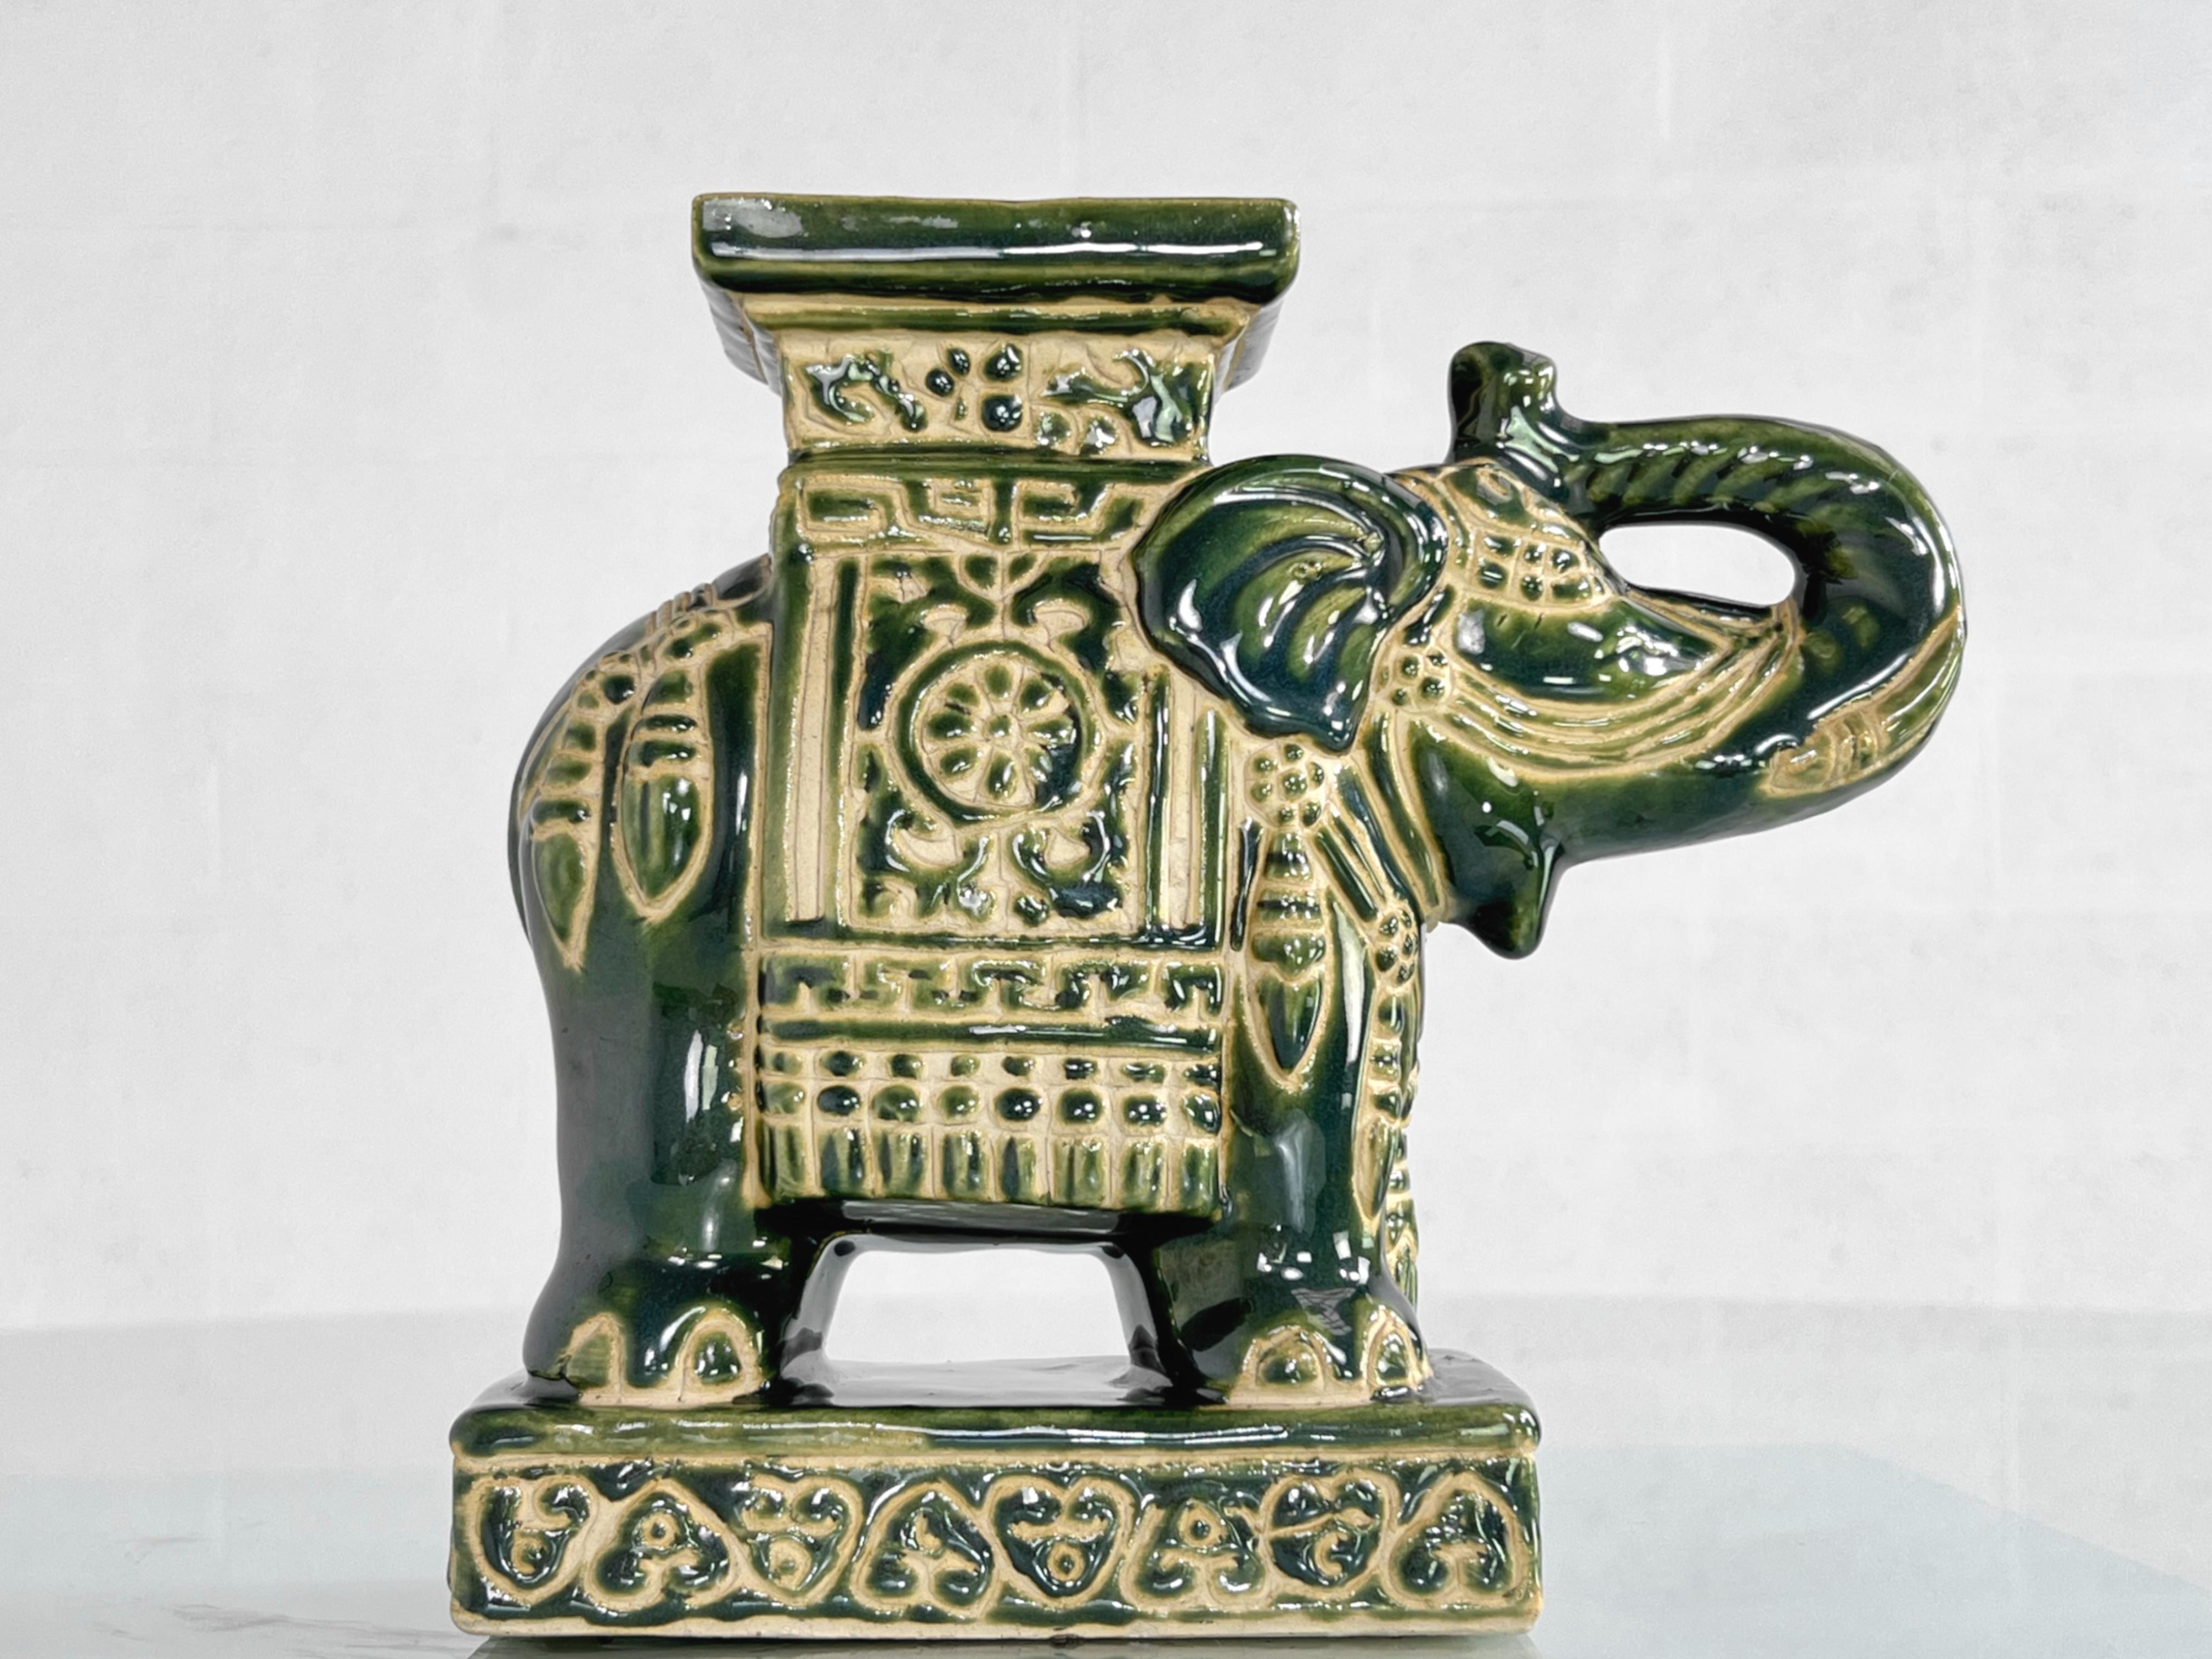 1960s - 1970s Vintage Ceramic Sculpture Elephant shaped in green colors